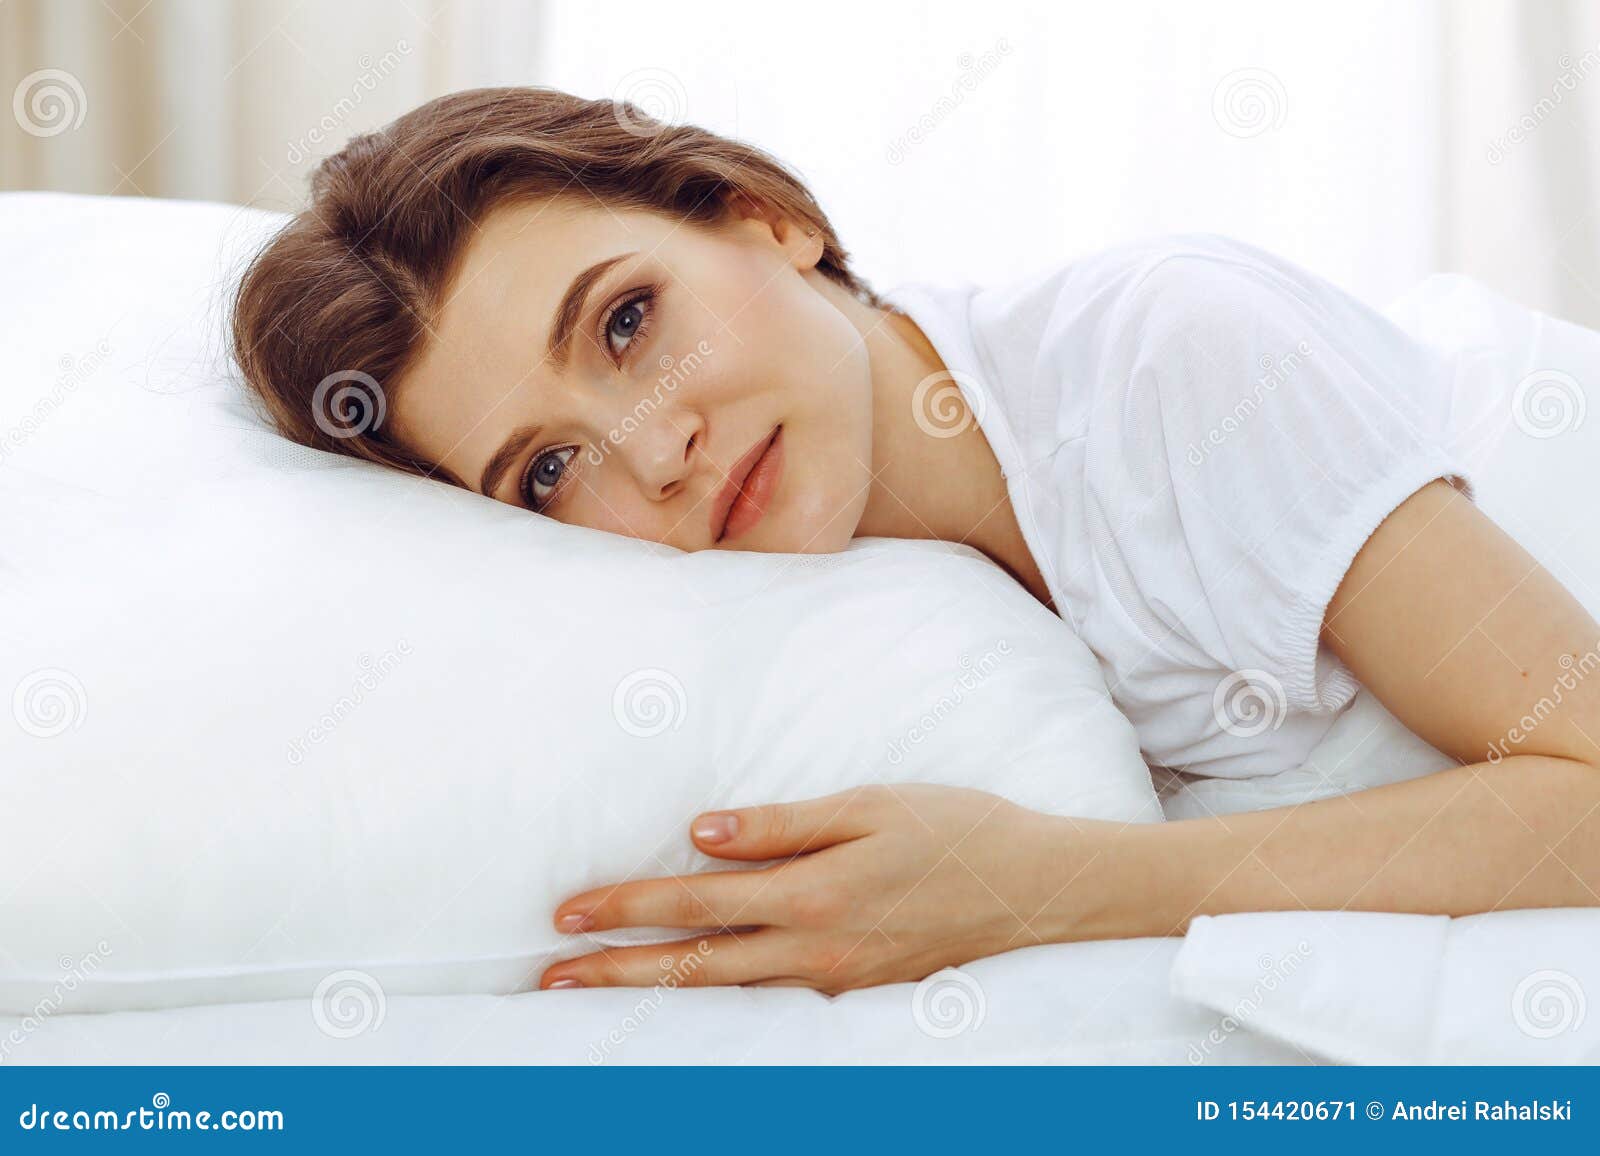 Beautiful Young Woman Sleeping While Lying In Her Bed 